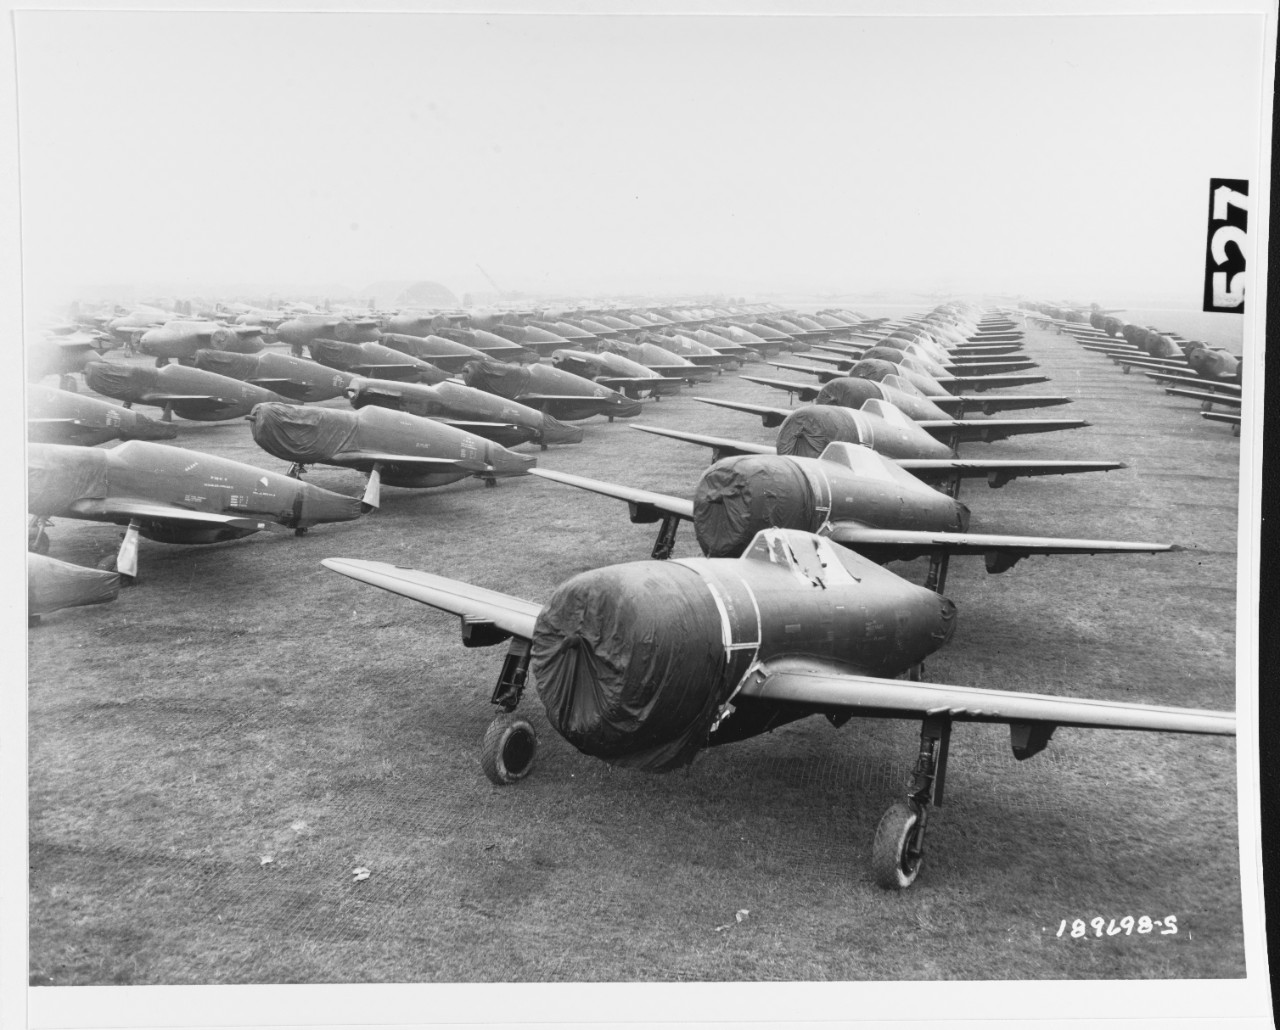 U.S. Army Air Forces Aircraft await assembly in an English field, after being transported by ship across the Atlantic. 13 April 1944.